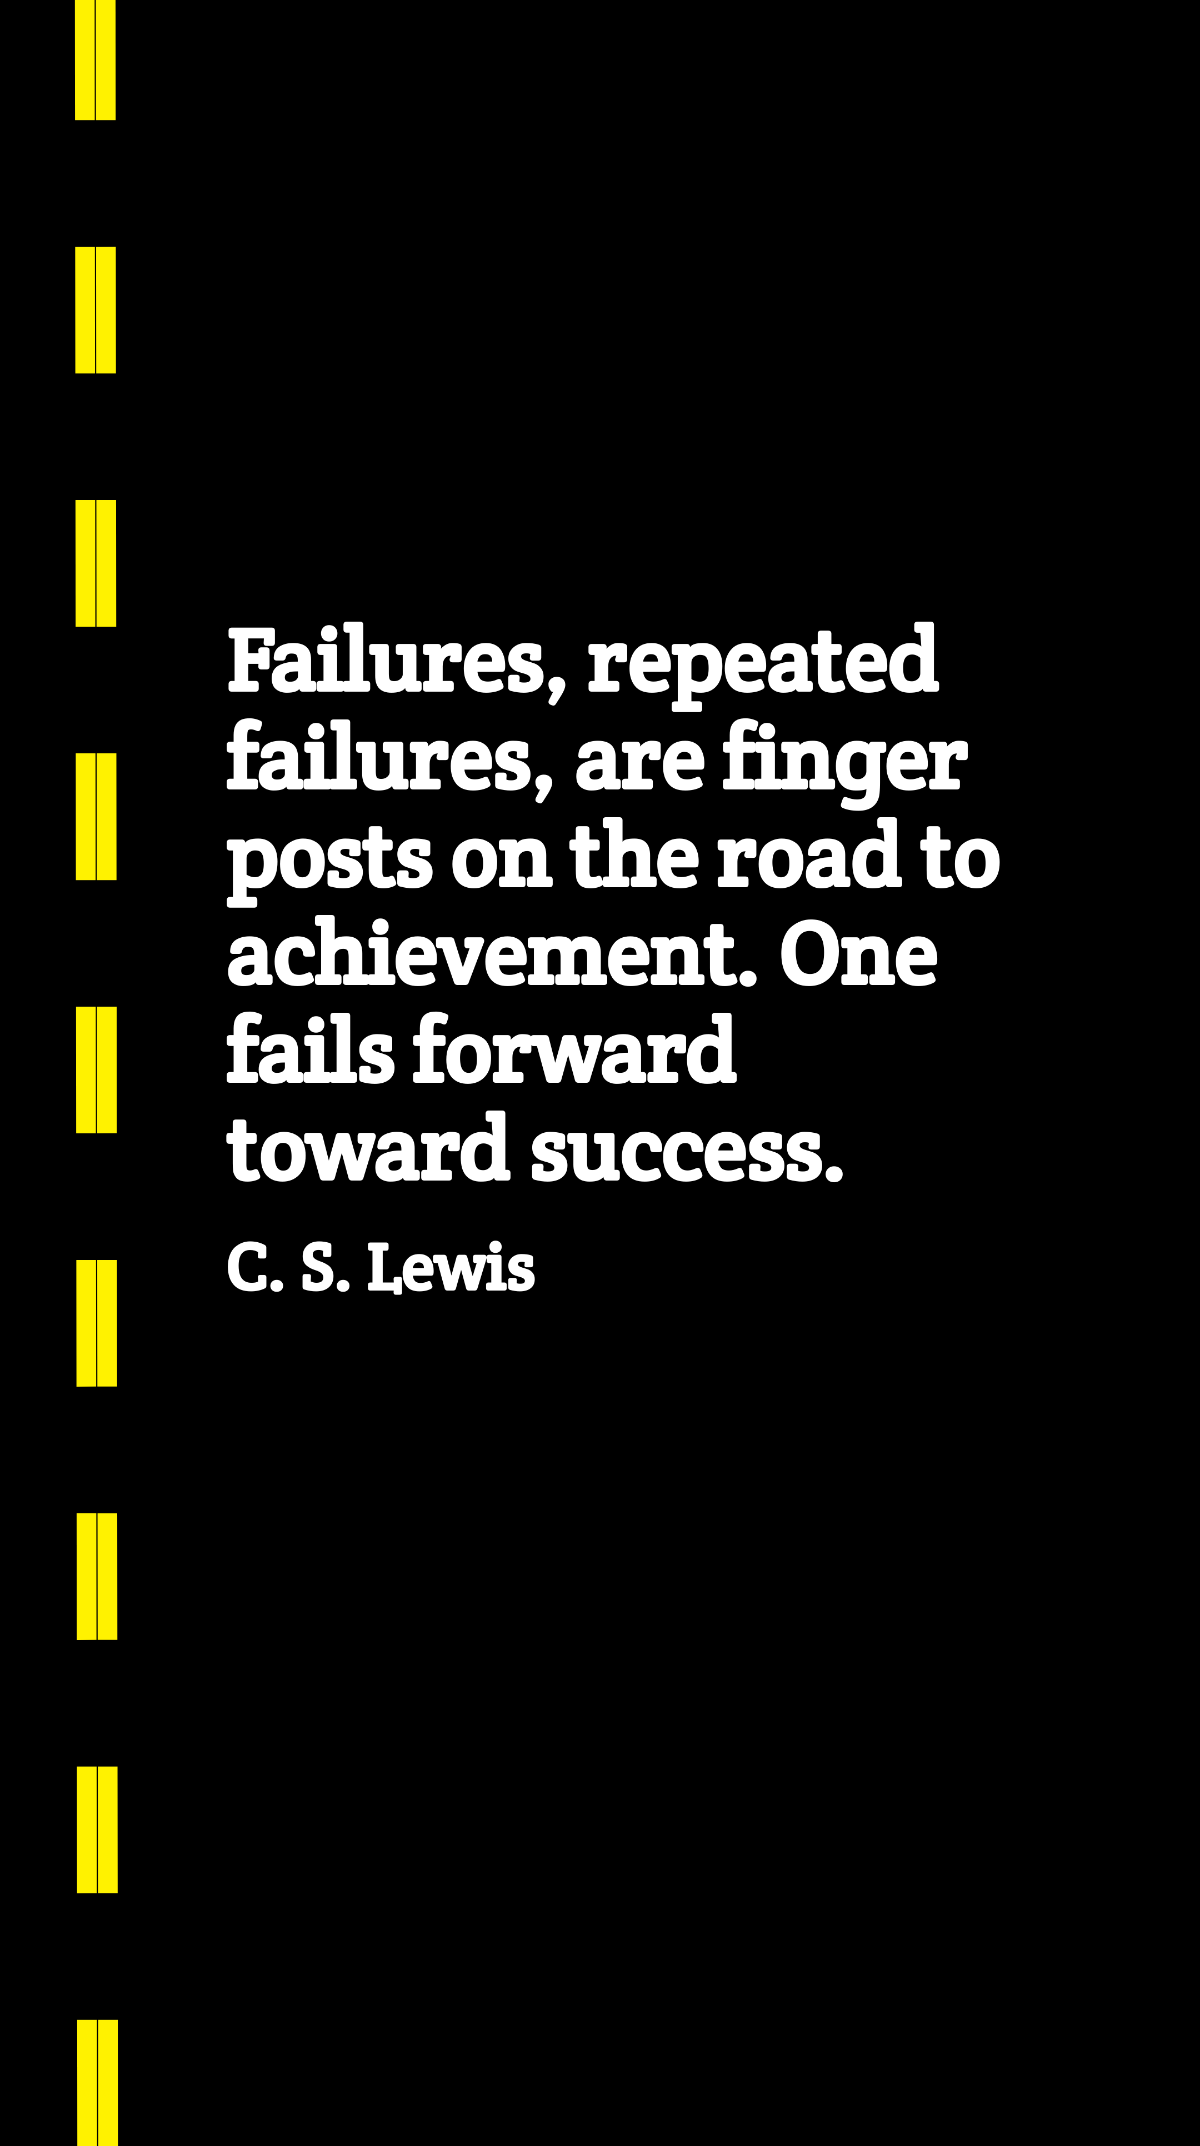 Free C. S. Lewis - Failures, repeated failures, are finger posts on the road to achievement. One fails forward toward success. Template